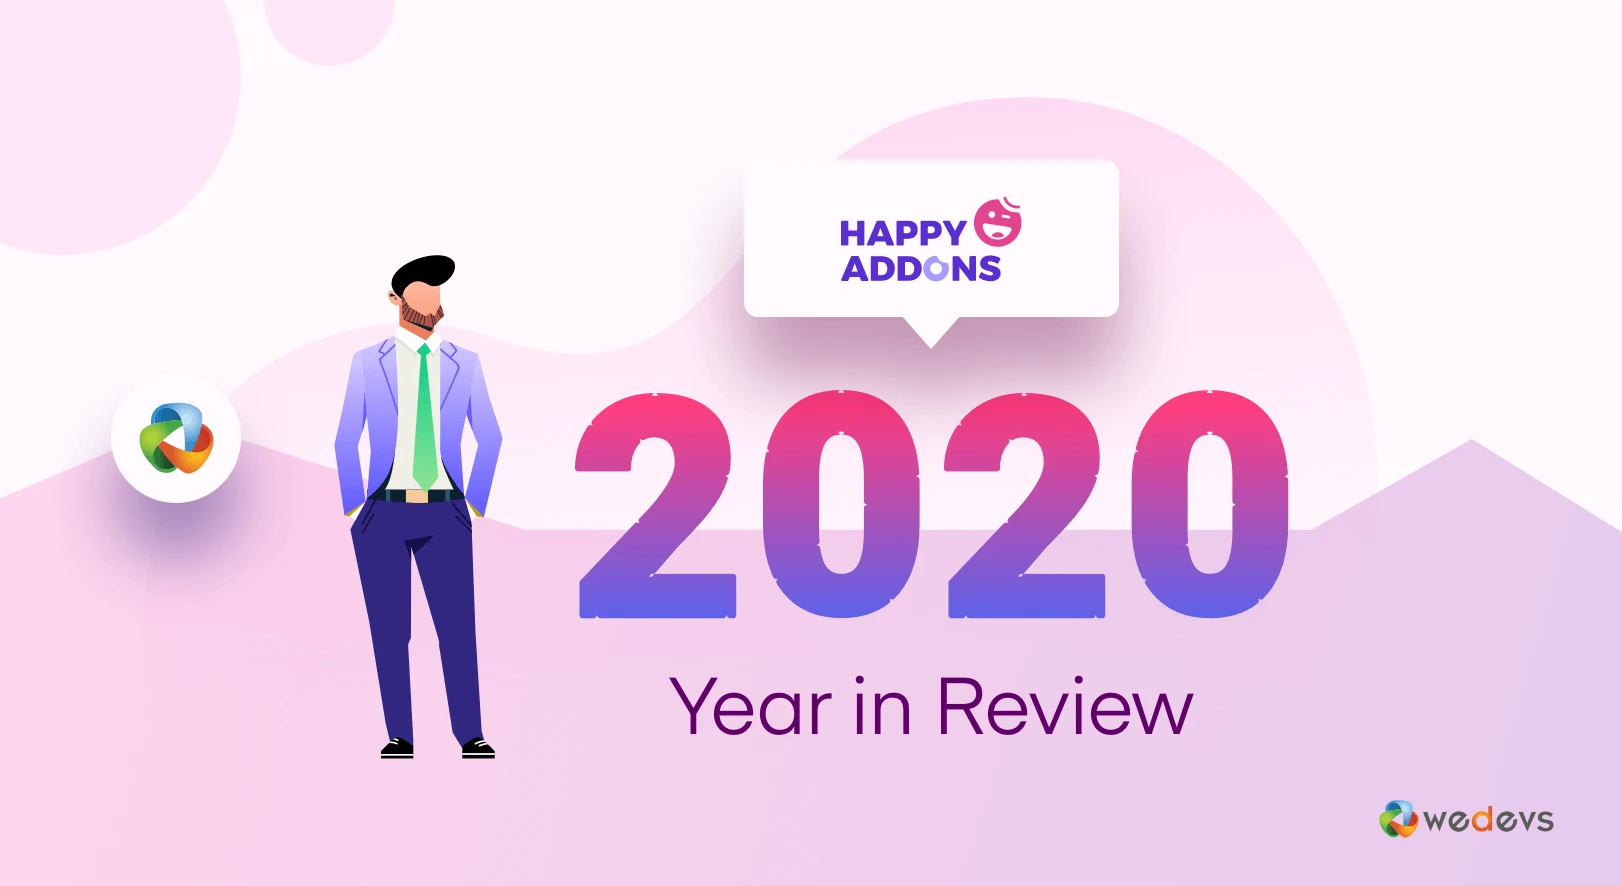 HappyAddons Year In Review 2020: How We Become A Family of 100,000 Happy Users!